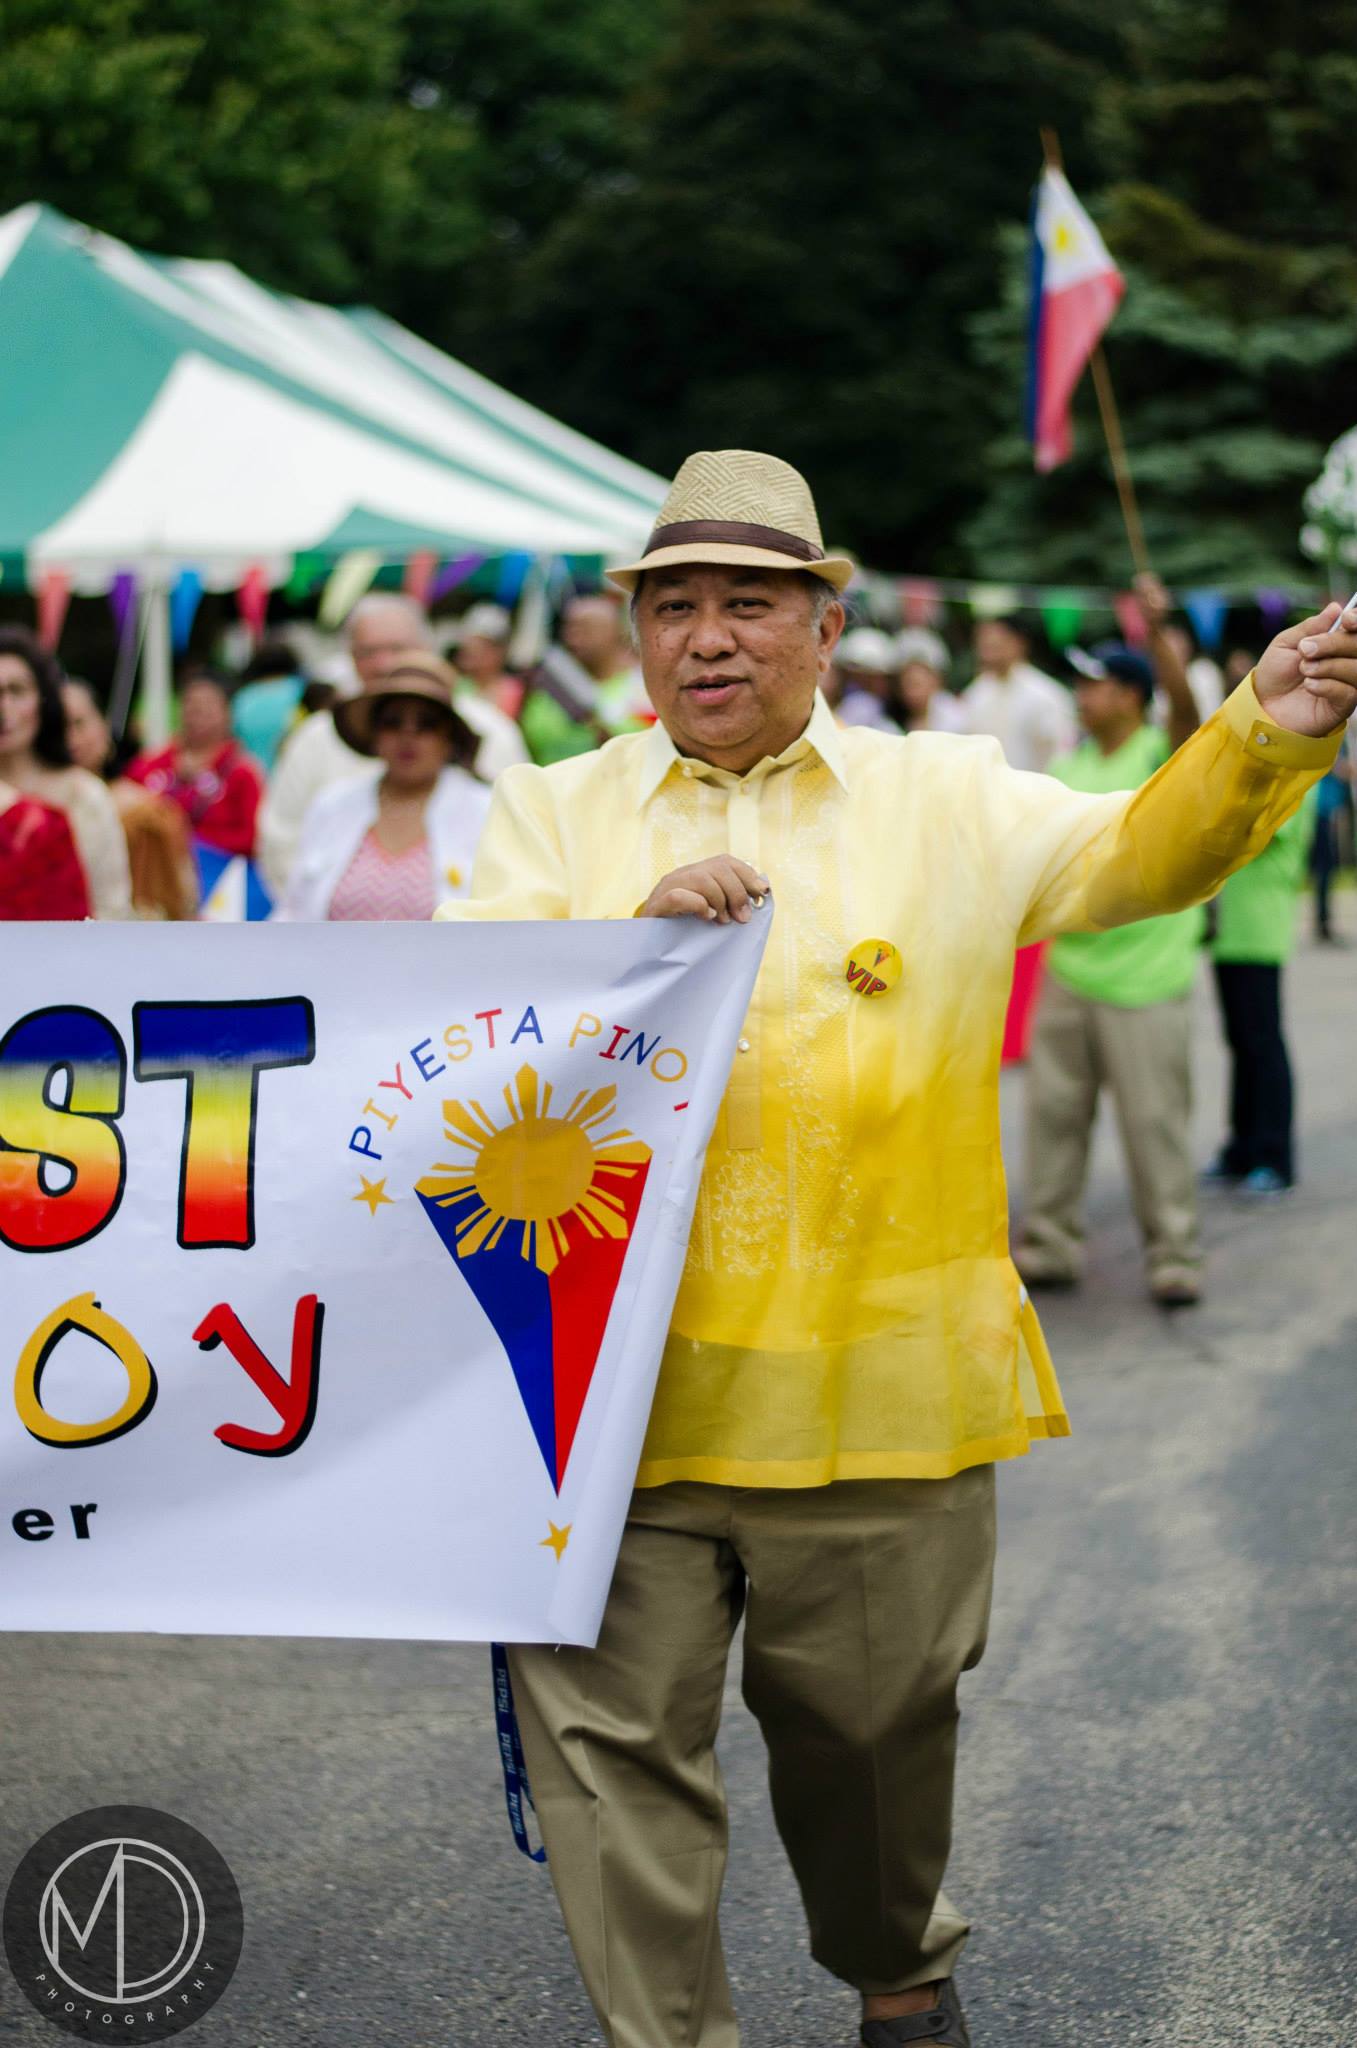 Ruben Salazar, Cultural Director of PACF and organizer of Piyesta Pinoy, marching in the parade. (c) Field Museum of Natural History - CC BY-NC 4.0